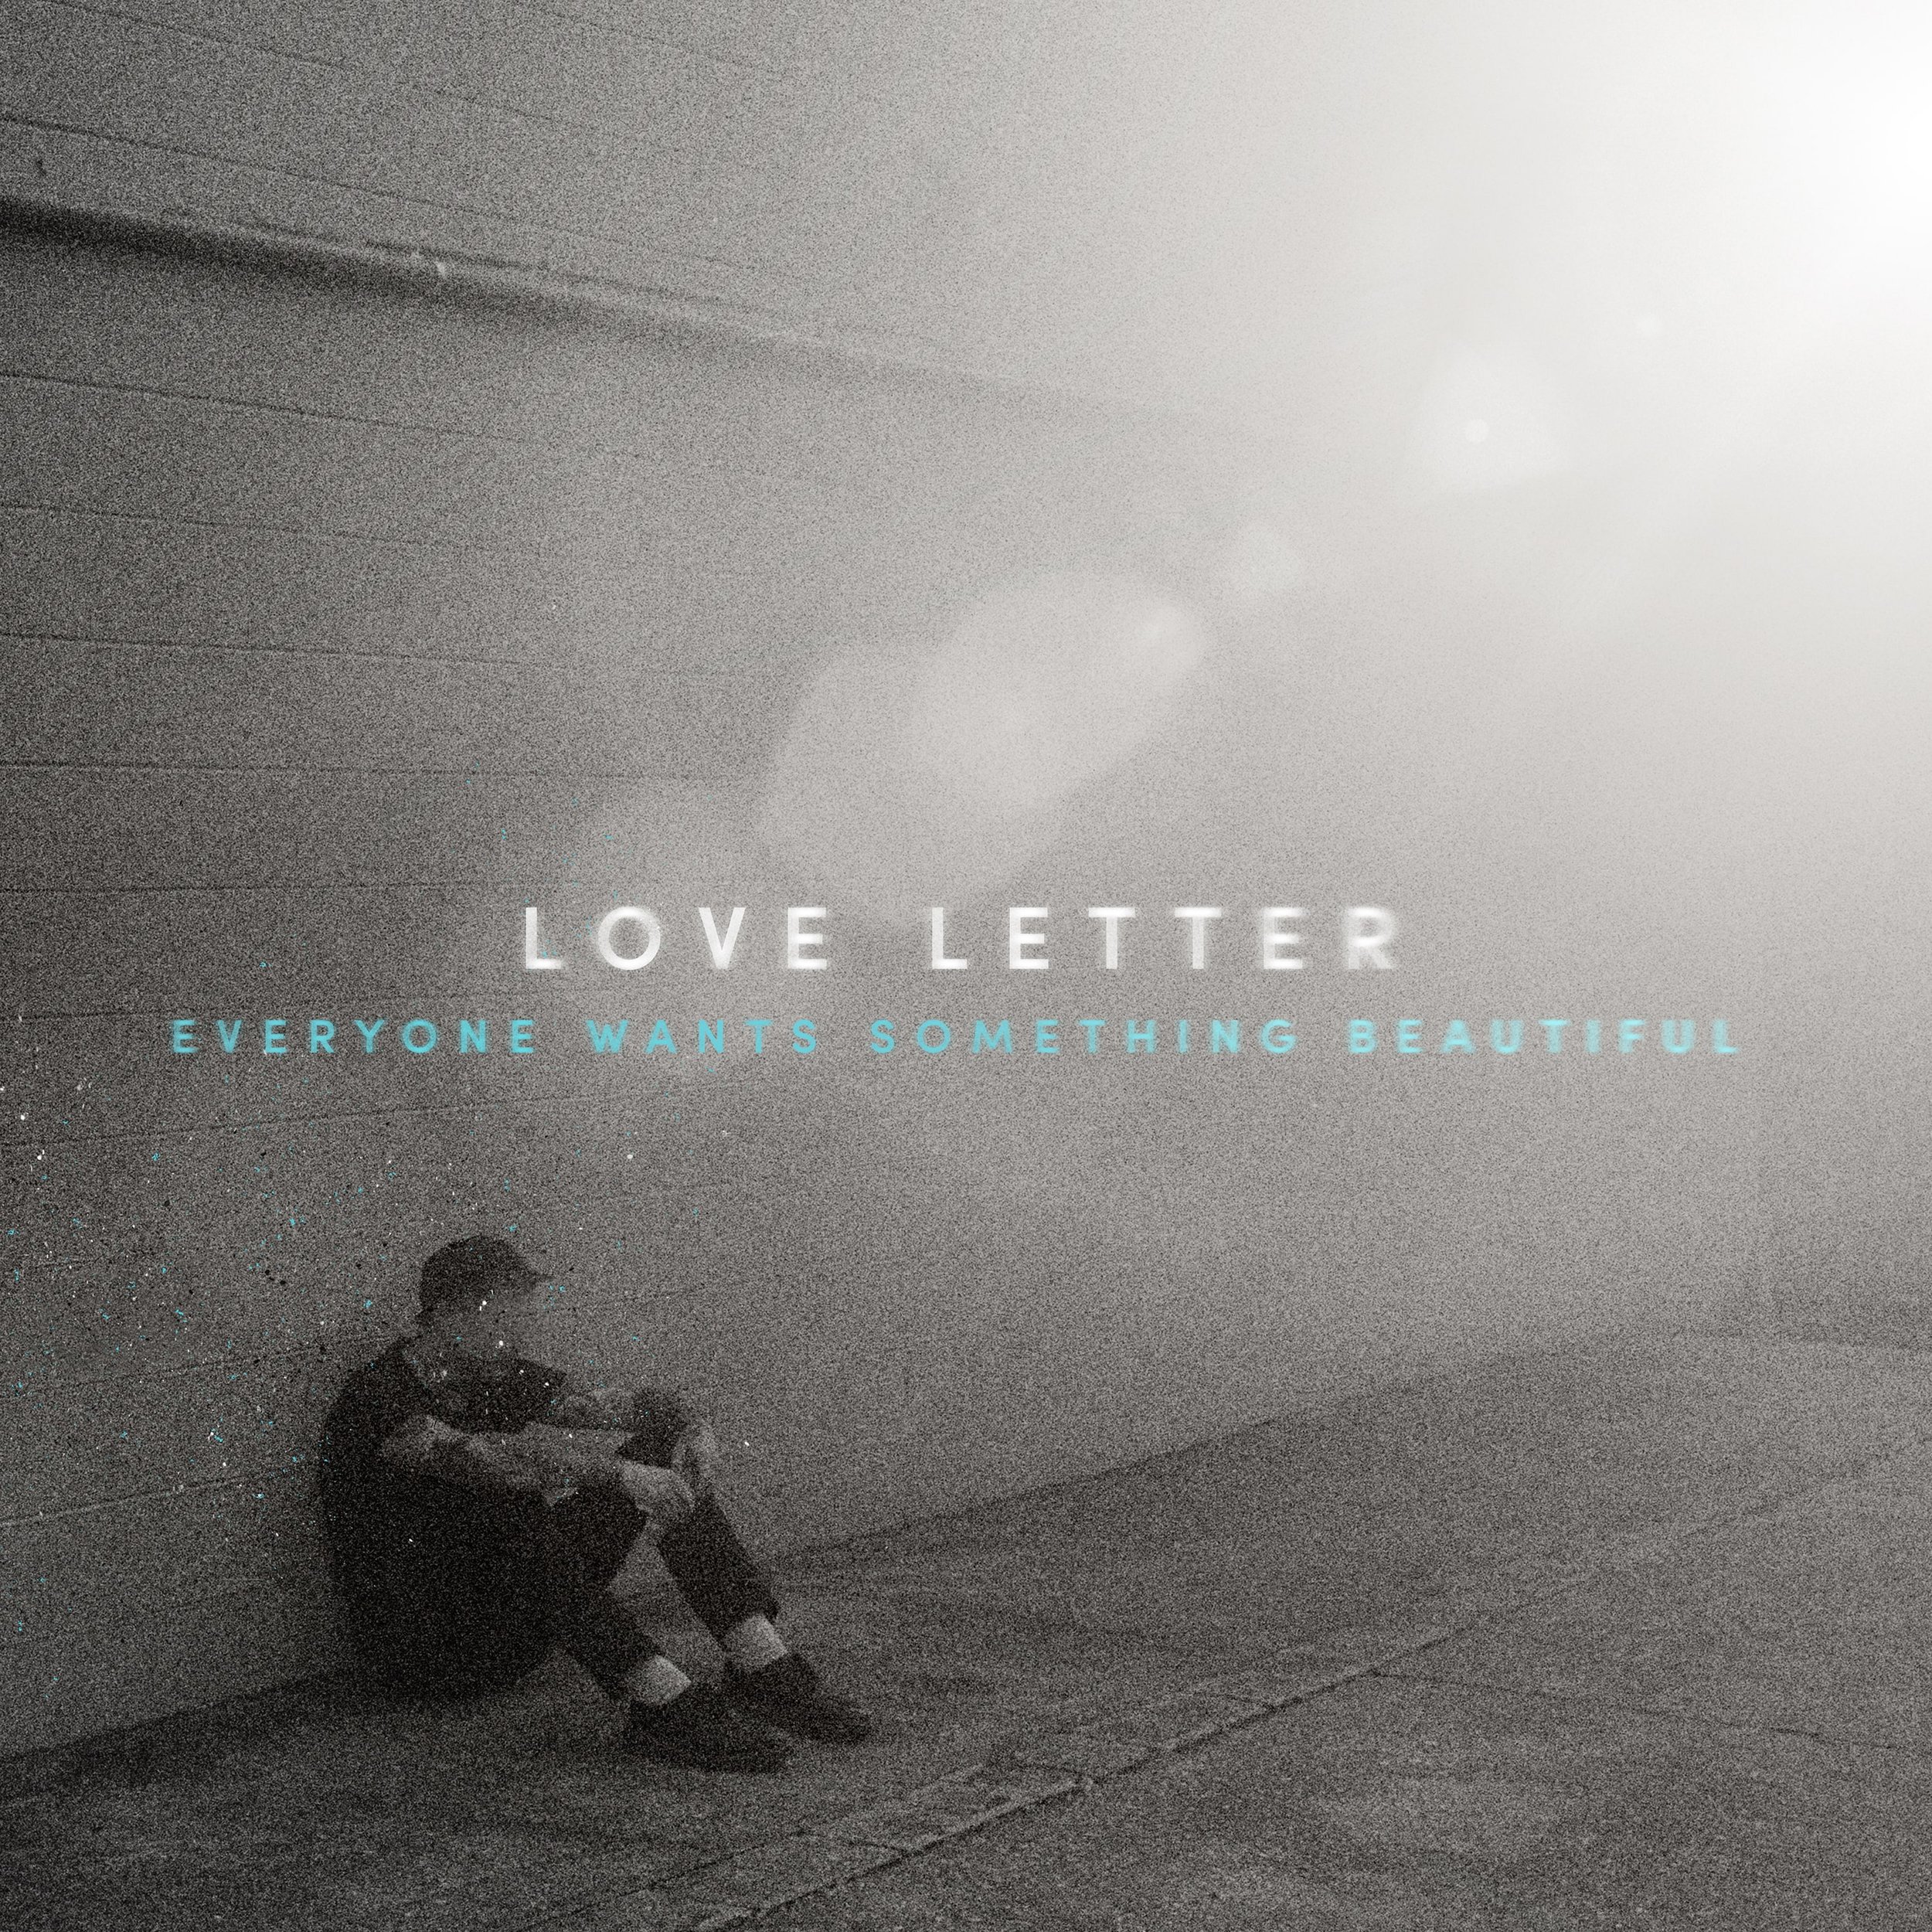 Love Letter - Everyone Wants Something Beautiful - Cover.jpg